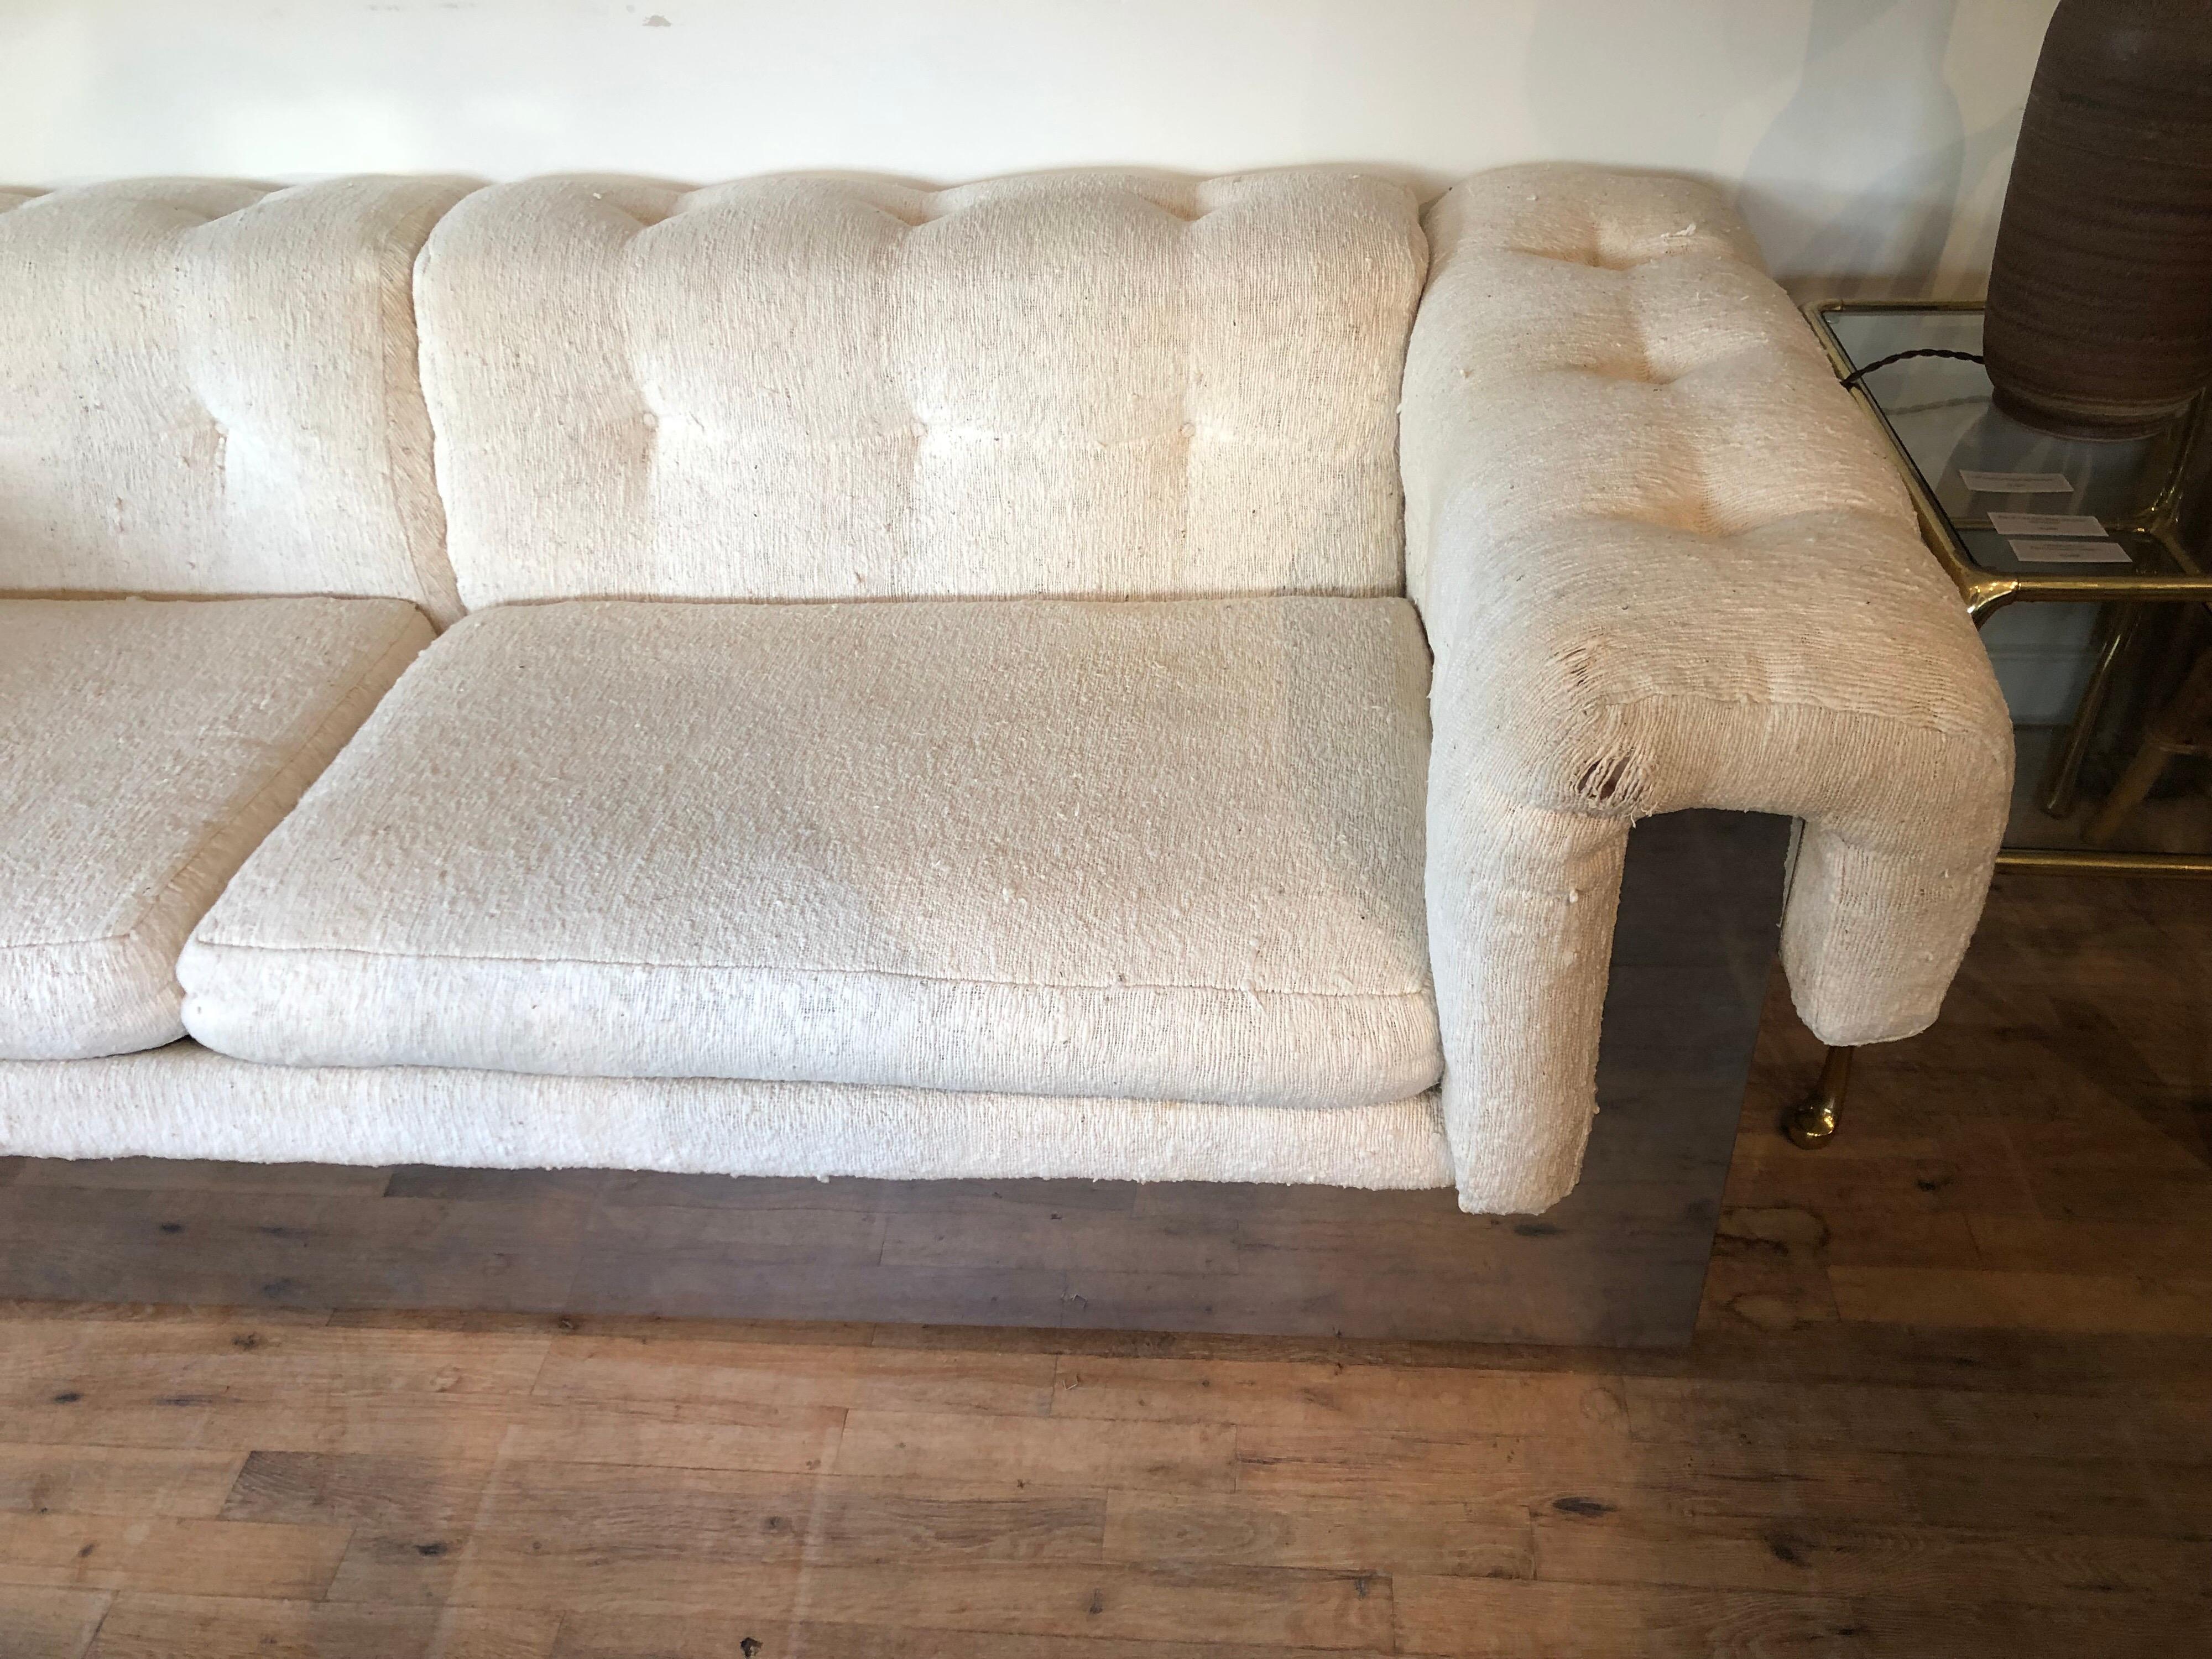 Stylish chrome based Chesterfield style midcentury sofa ready for your own fabric.....designed in the 1970s by Milo Baughman.